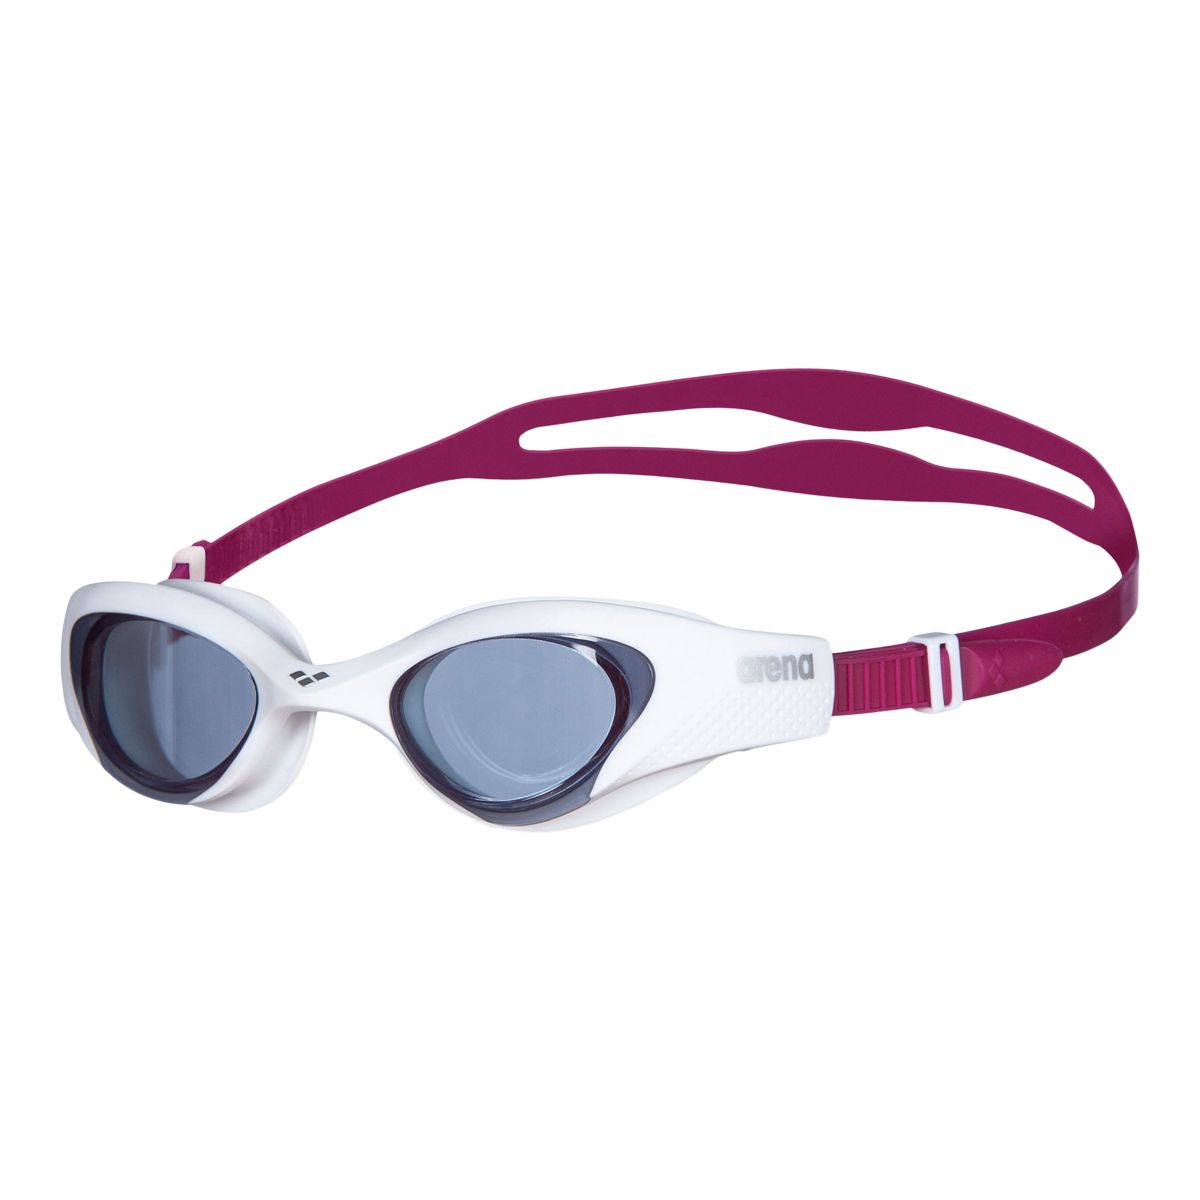 Image of arena Women's The One Goggles